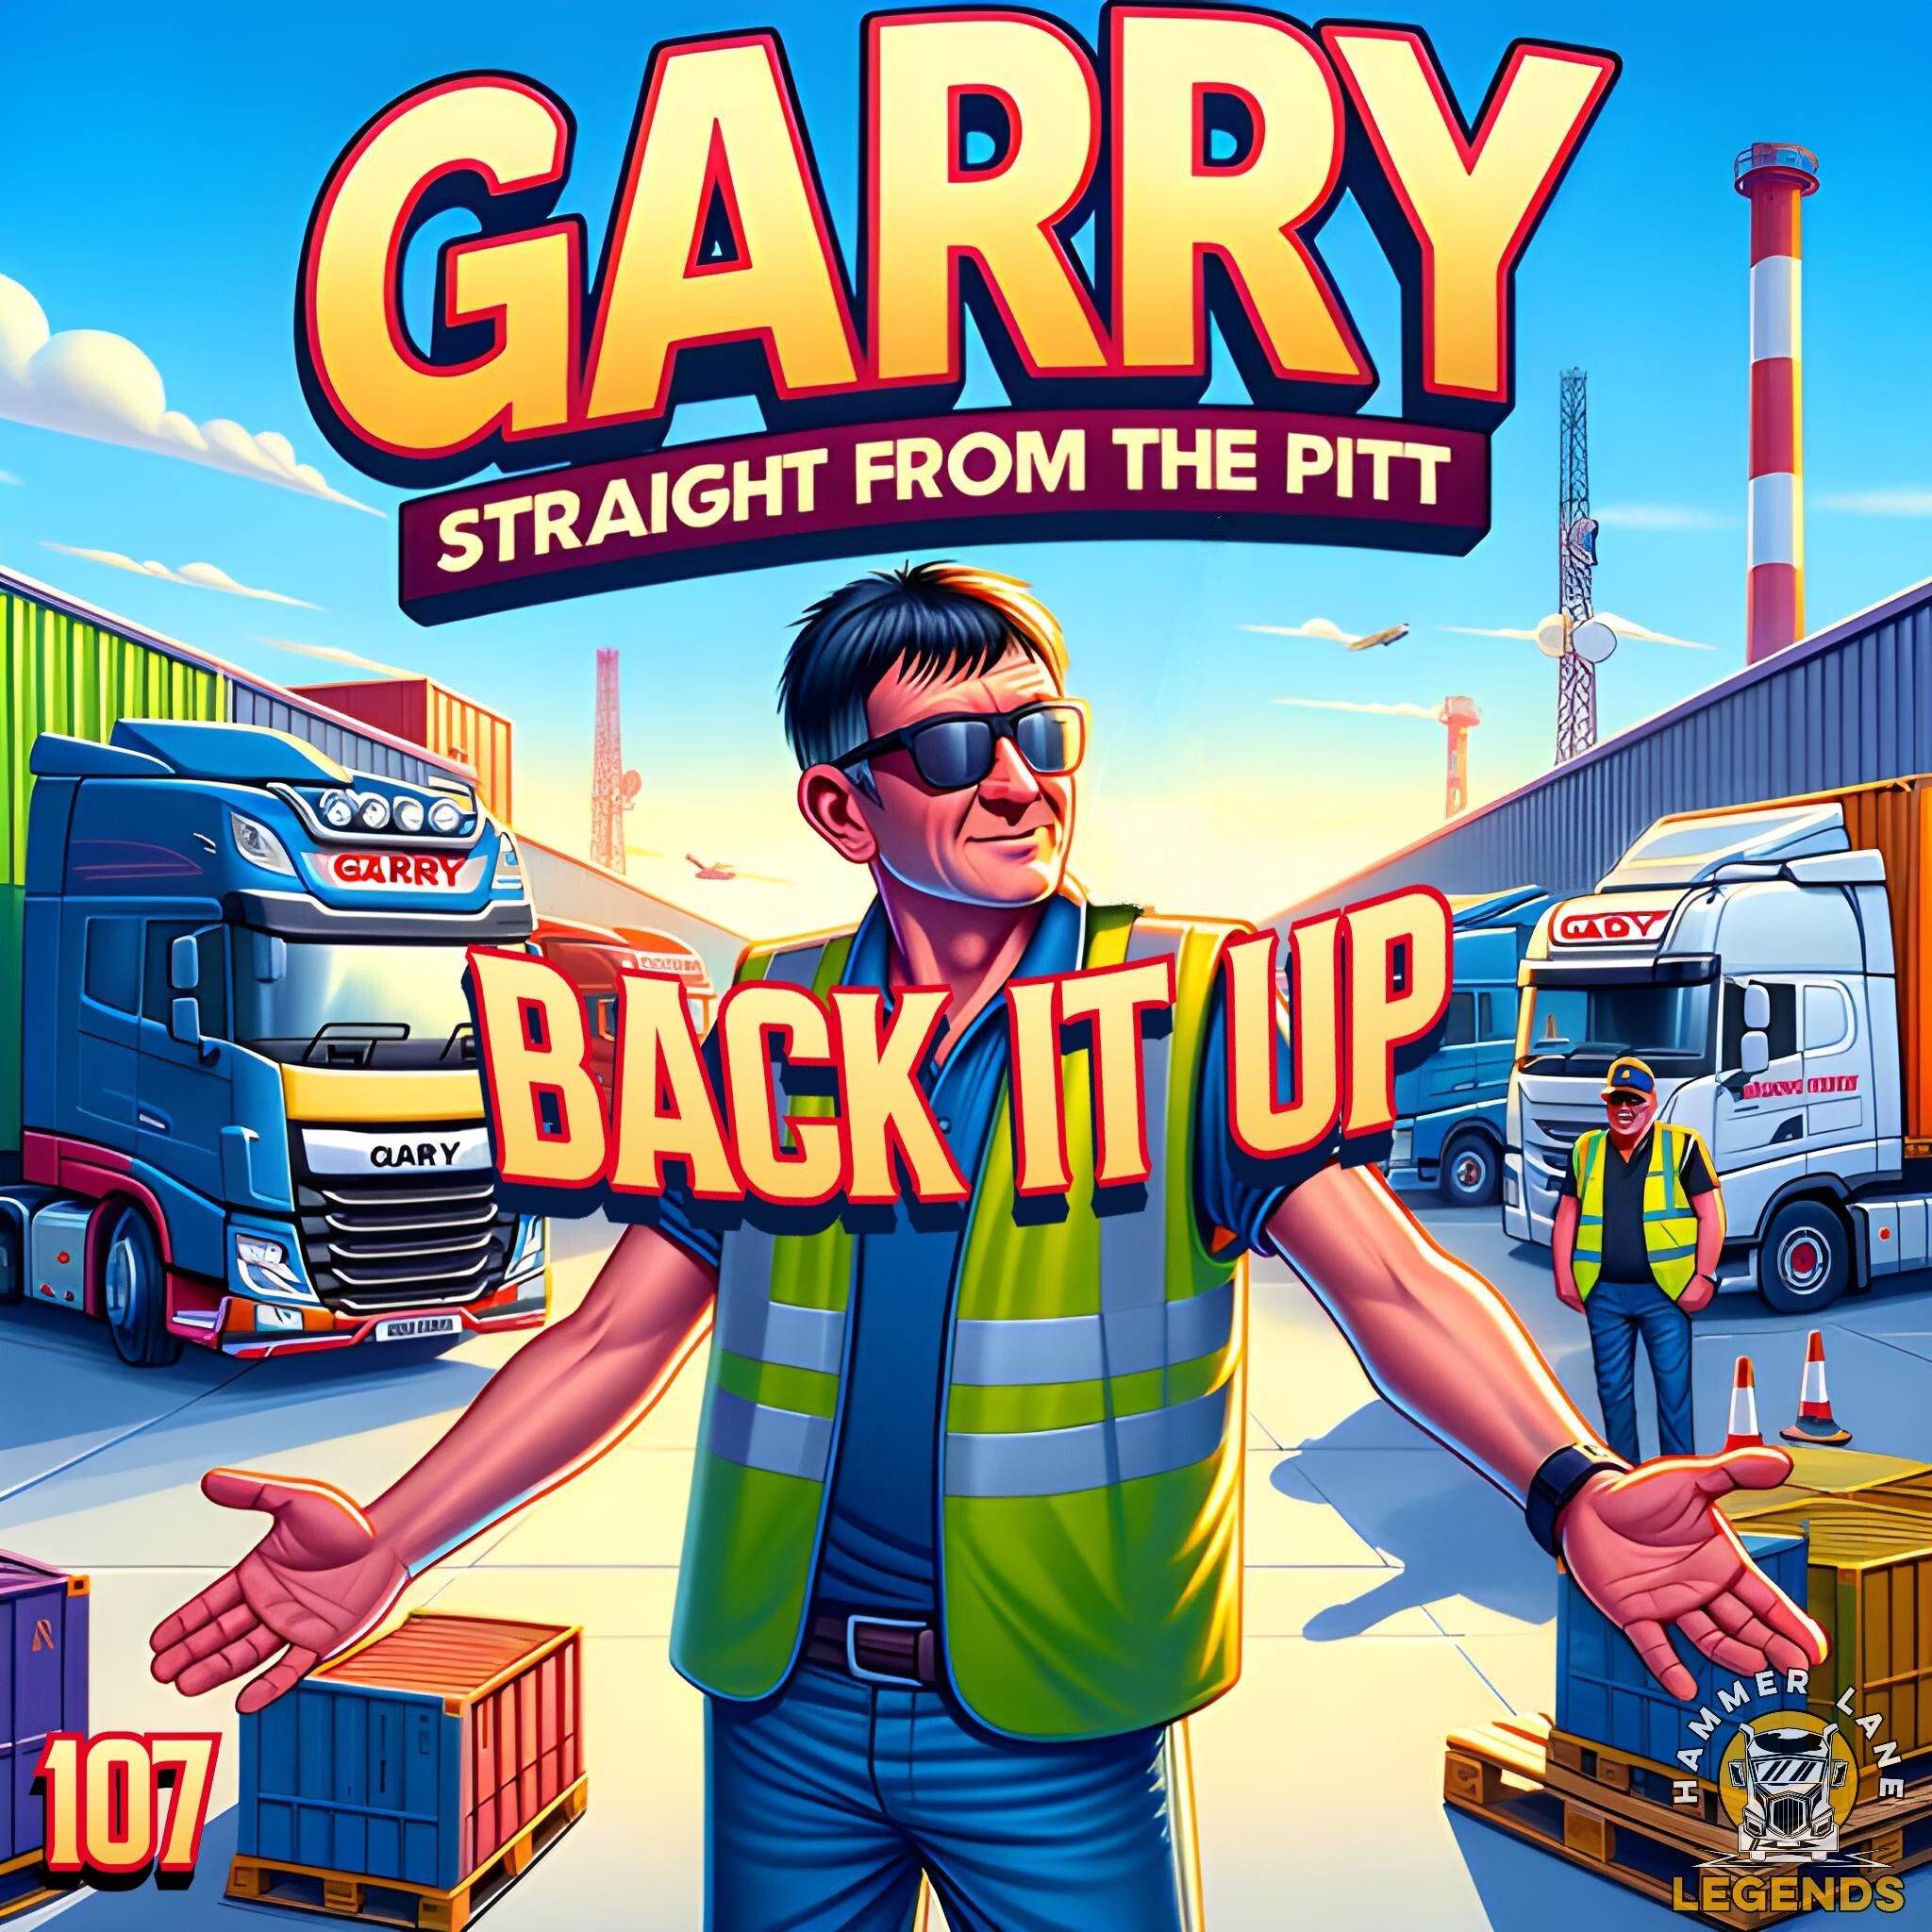 BACK IT UP | 107: Straight From The Pitt | Garry Bechtold